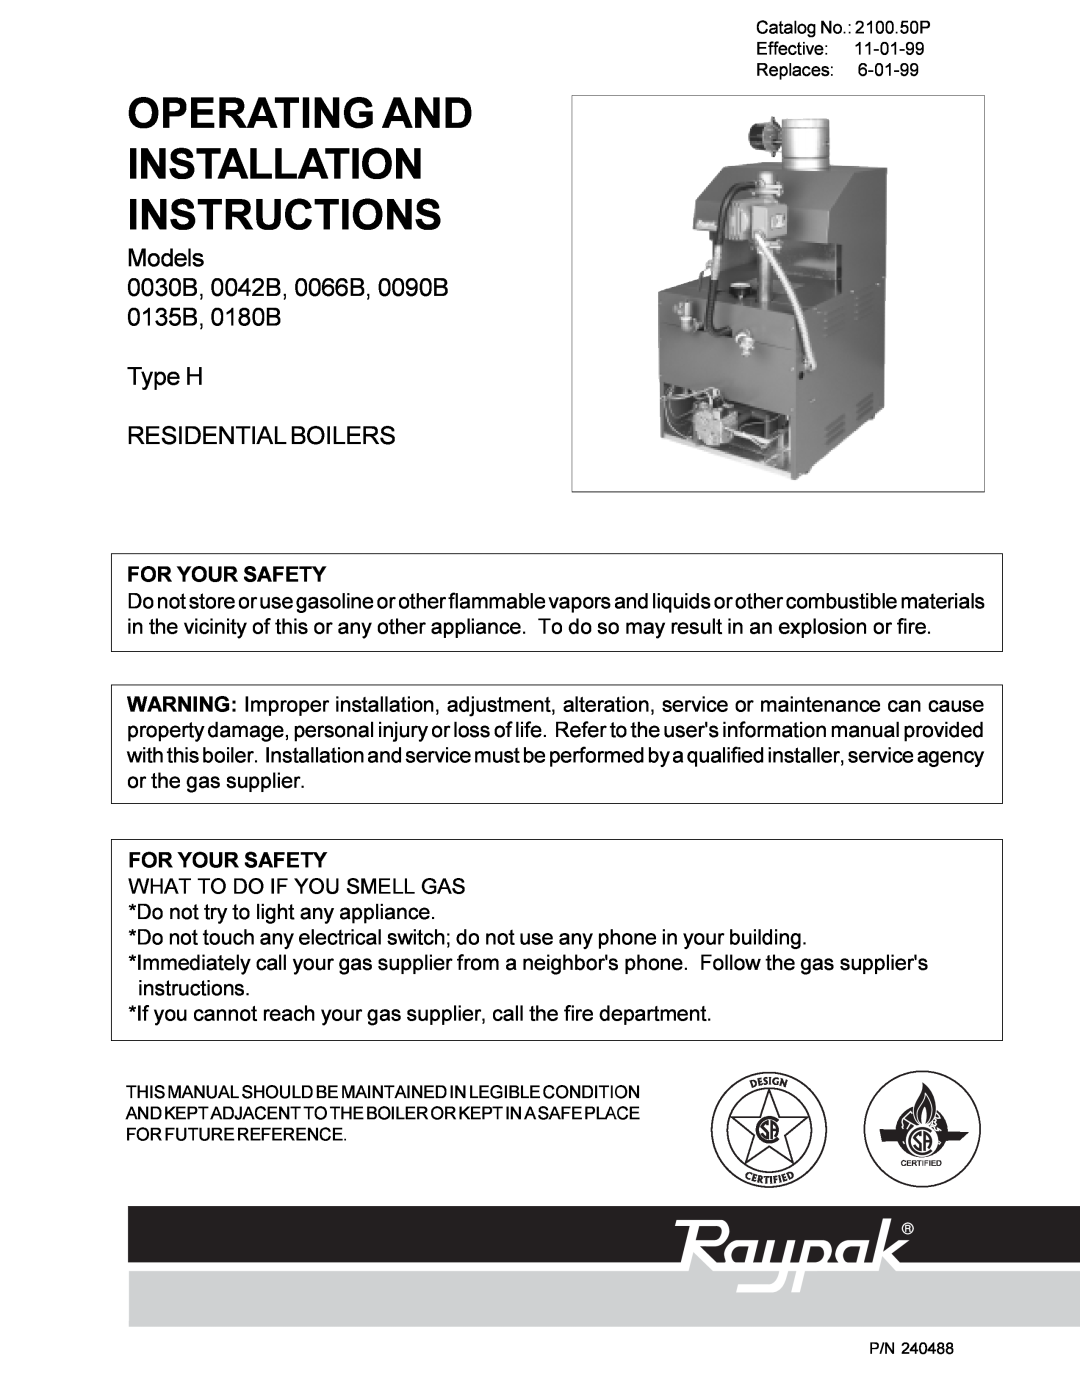 Raypak 0090B 0135B installation instructions For Your Safety, Operating And Installation Instructions 